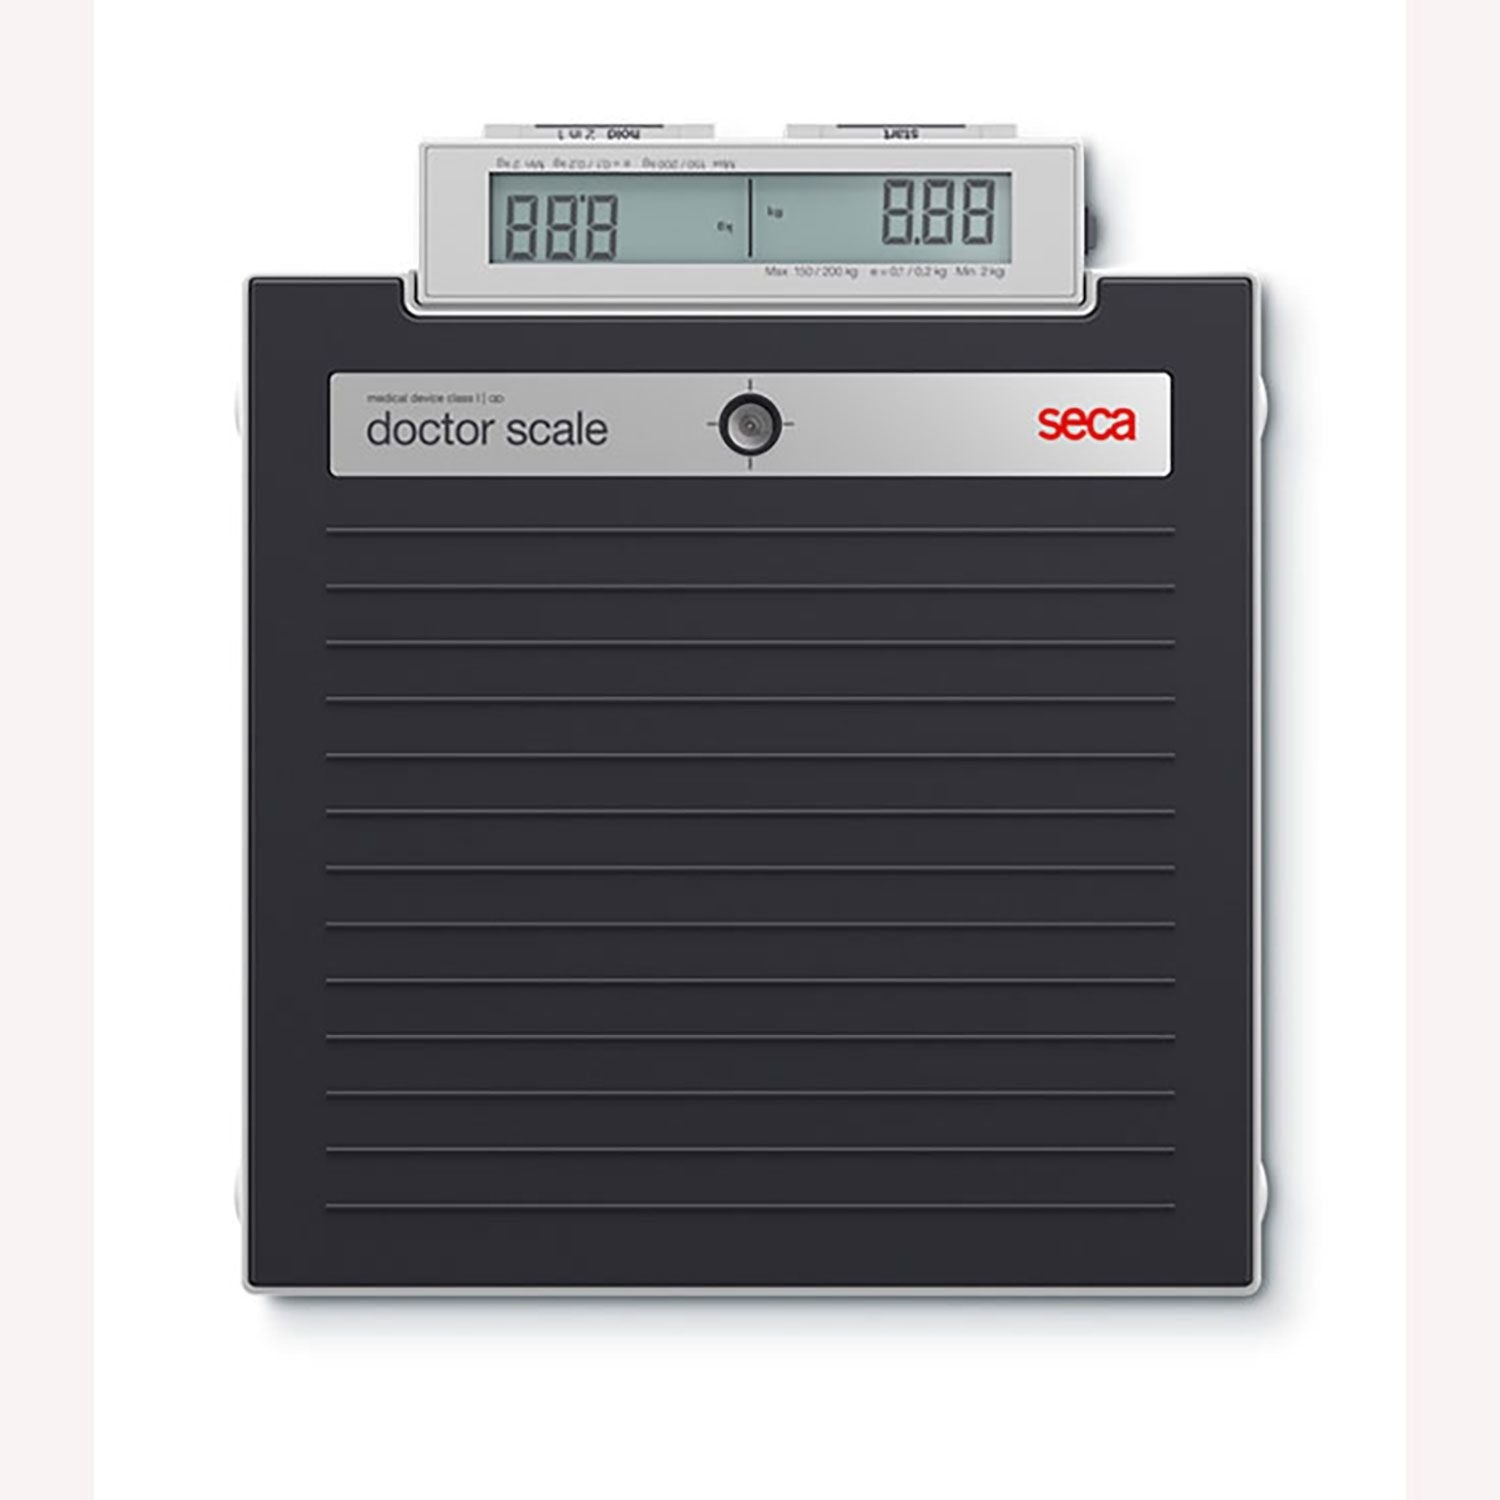 seca 878dr Class III Doctor Electronic Flat Scales